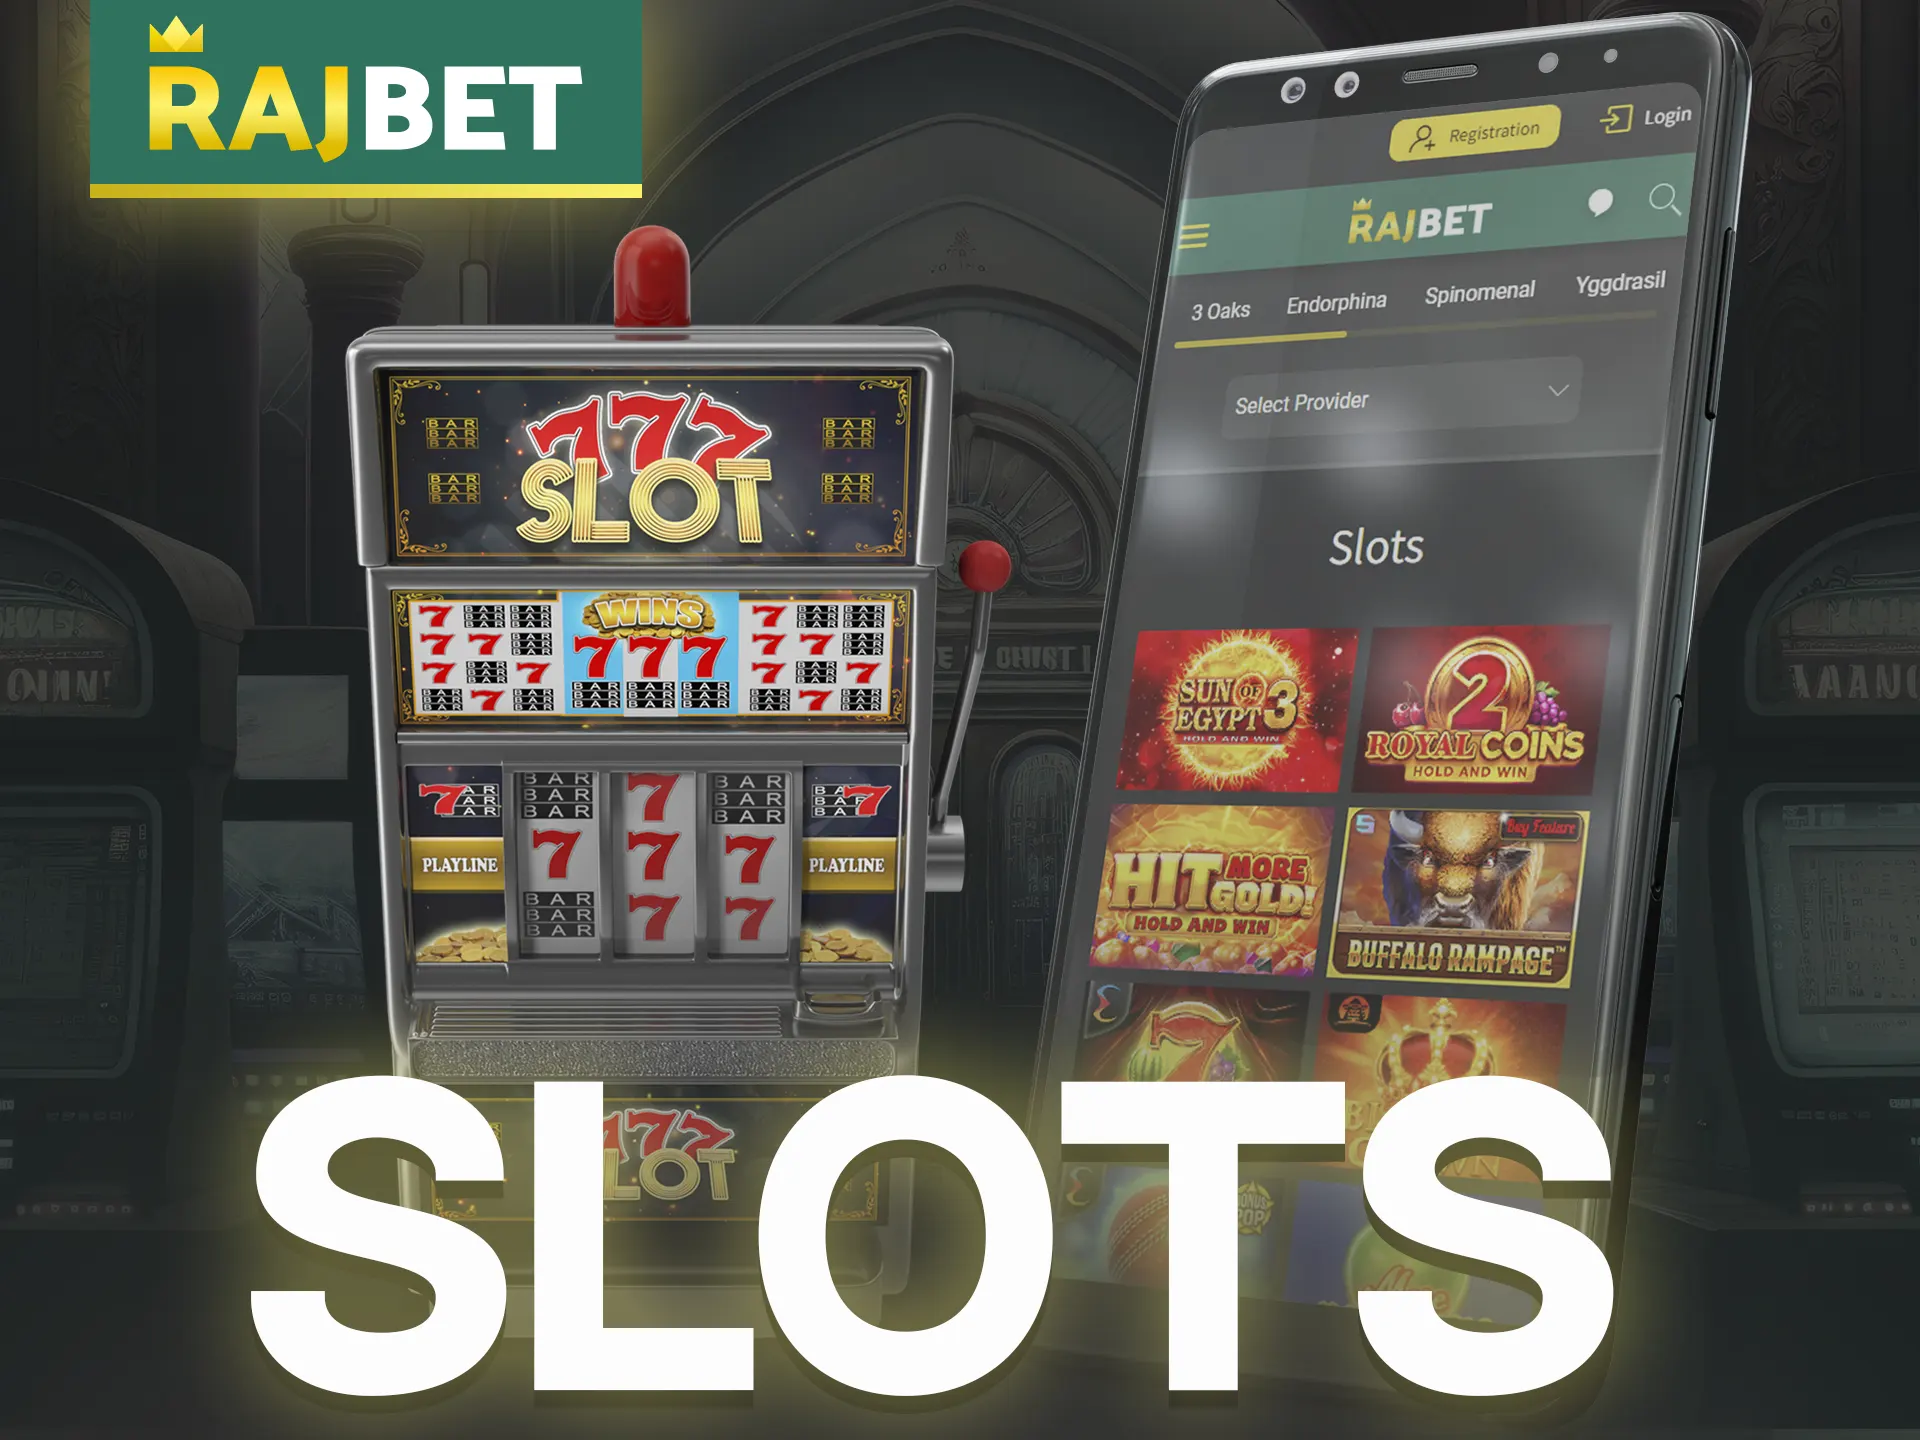 A wide selection of online slots awaits you on the Rajbet app.